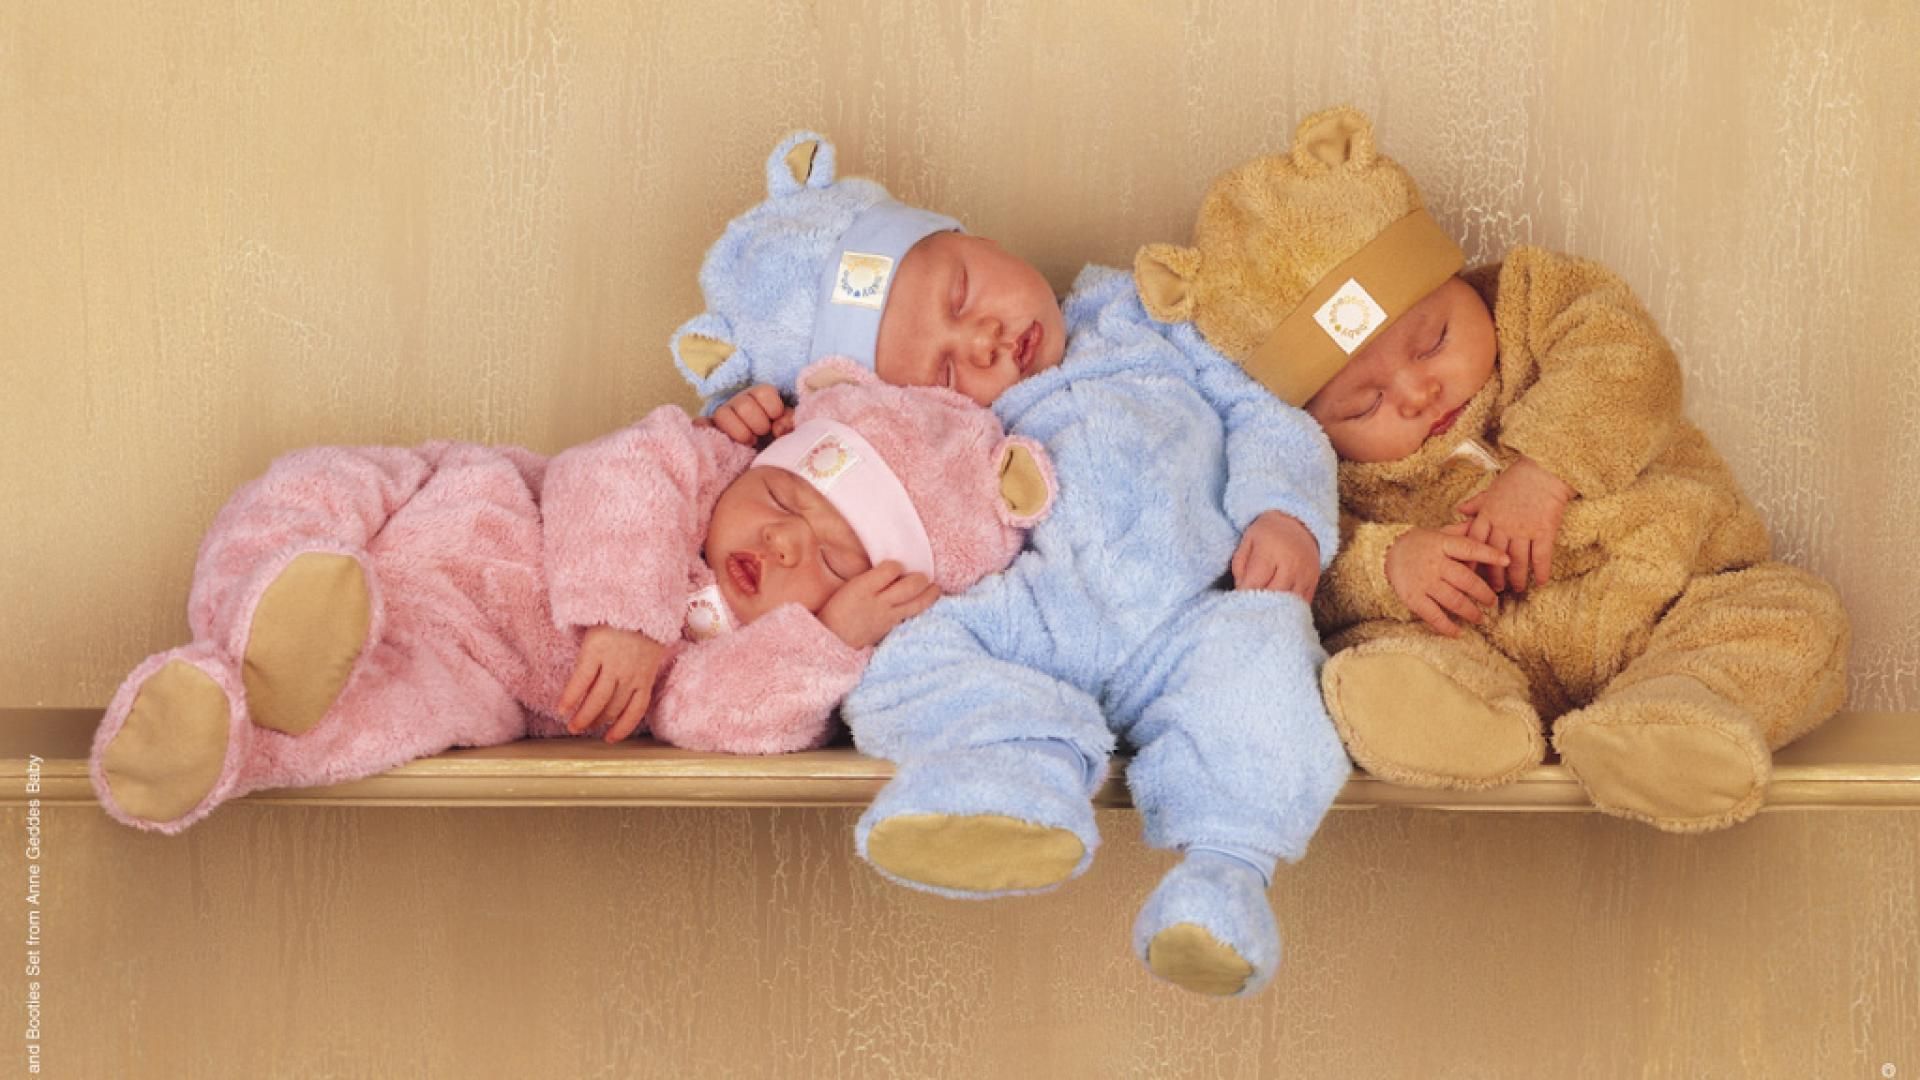 Cute Baby Sleep Picture HD Wallpaper of Baby &; hdwallpaper2013. Cute baby sleeping, Cute baby picture, Anne geddes